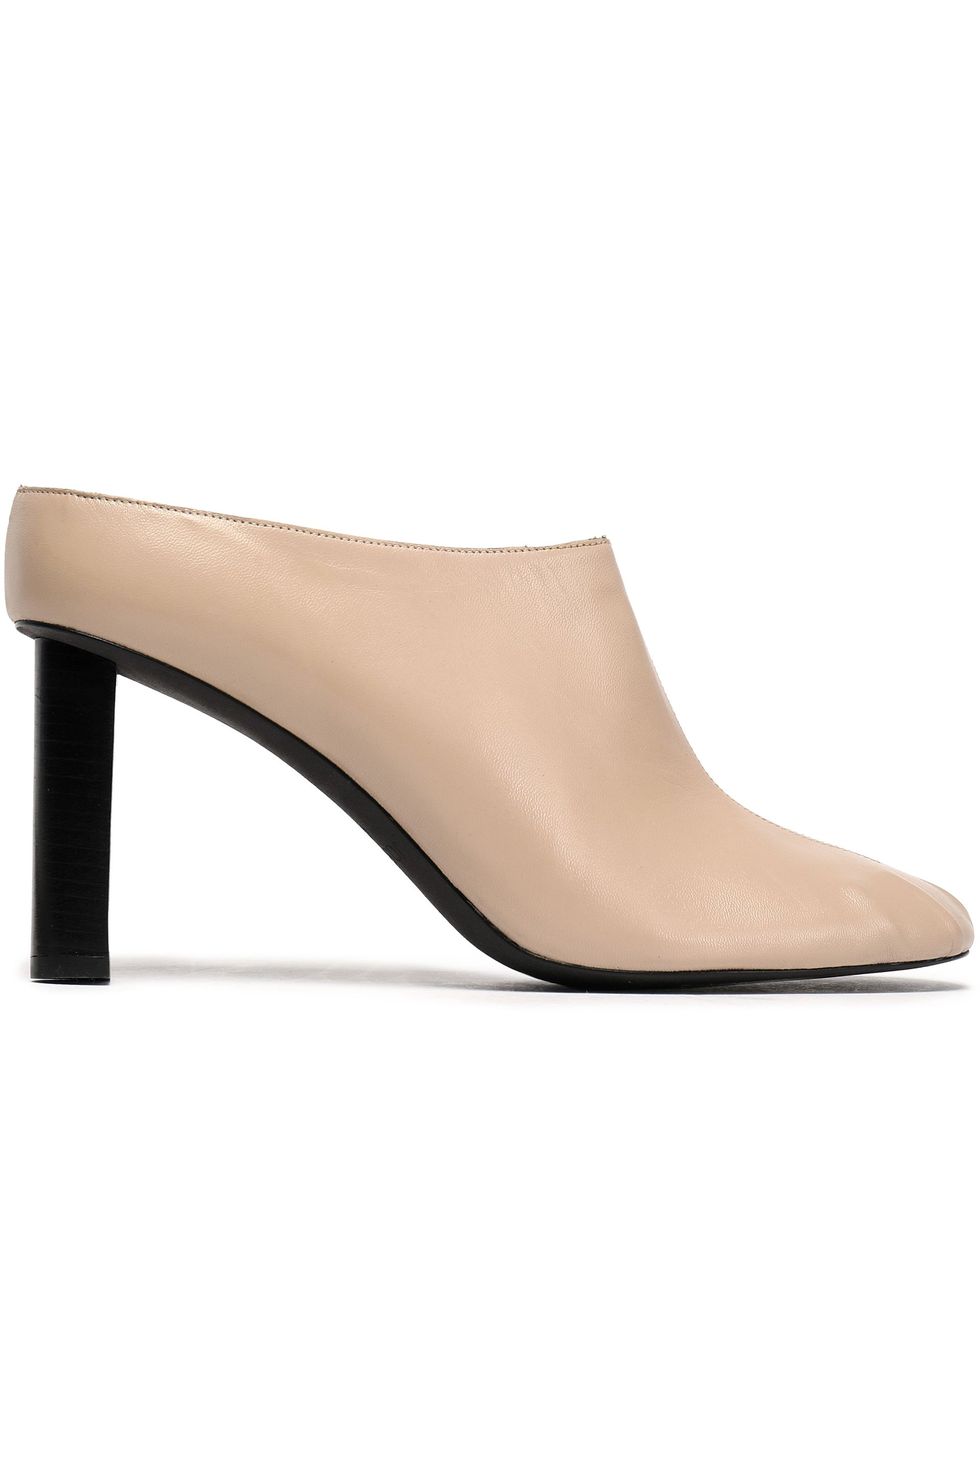 Architectural Leather Pumps